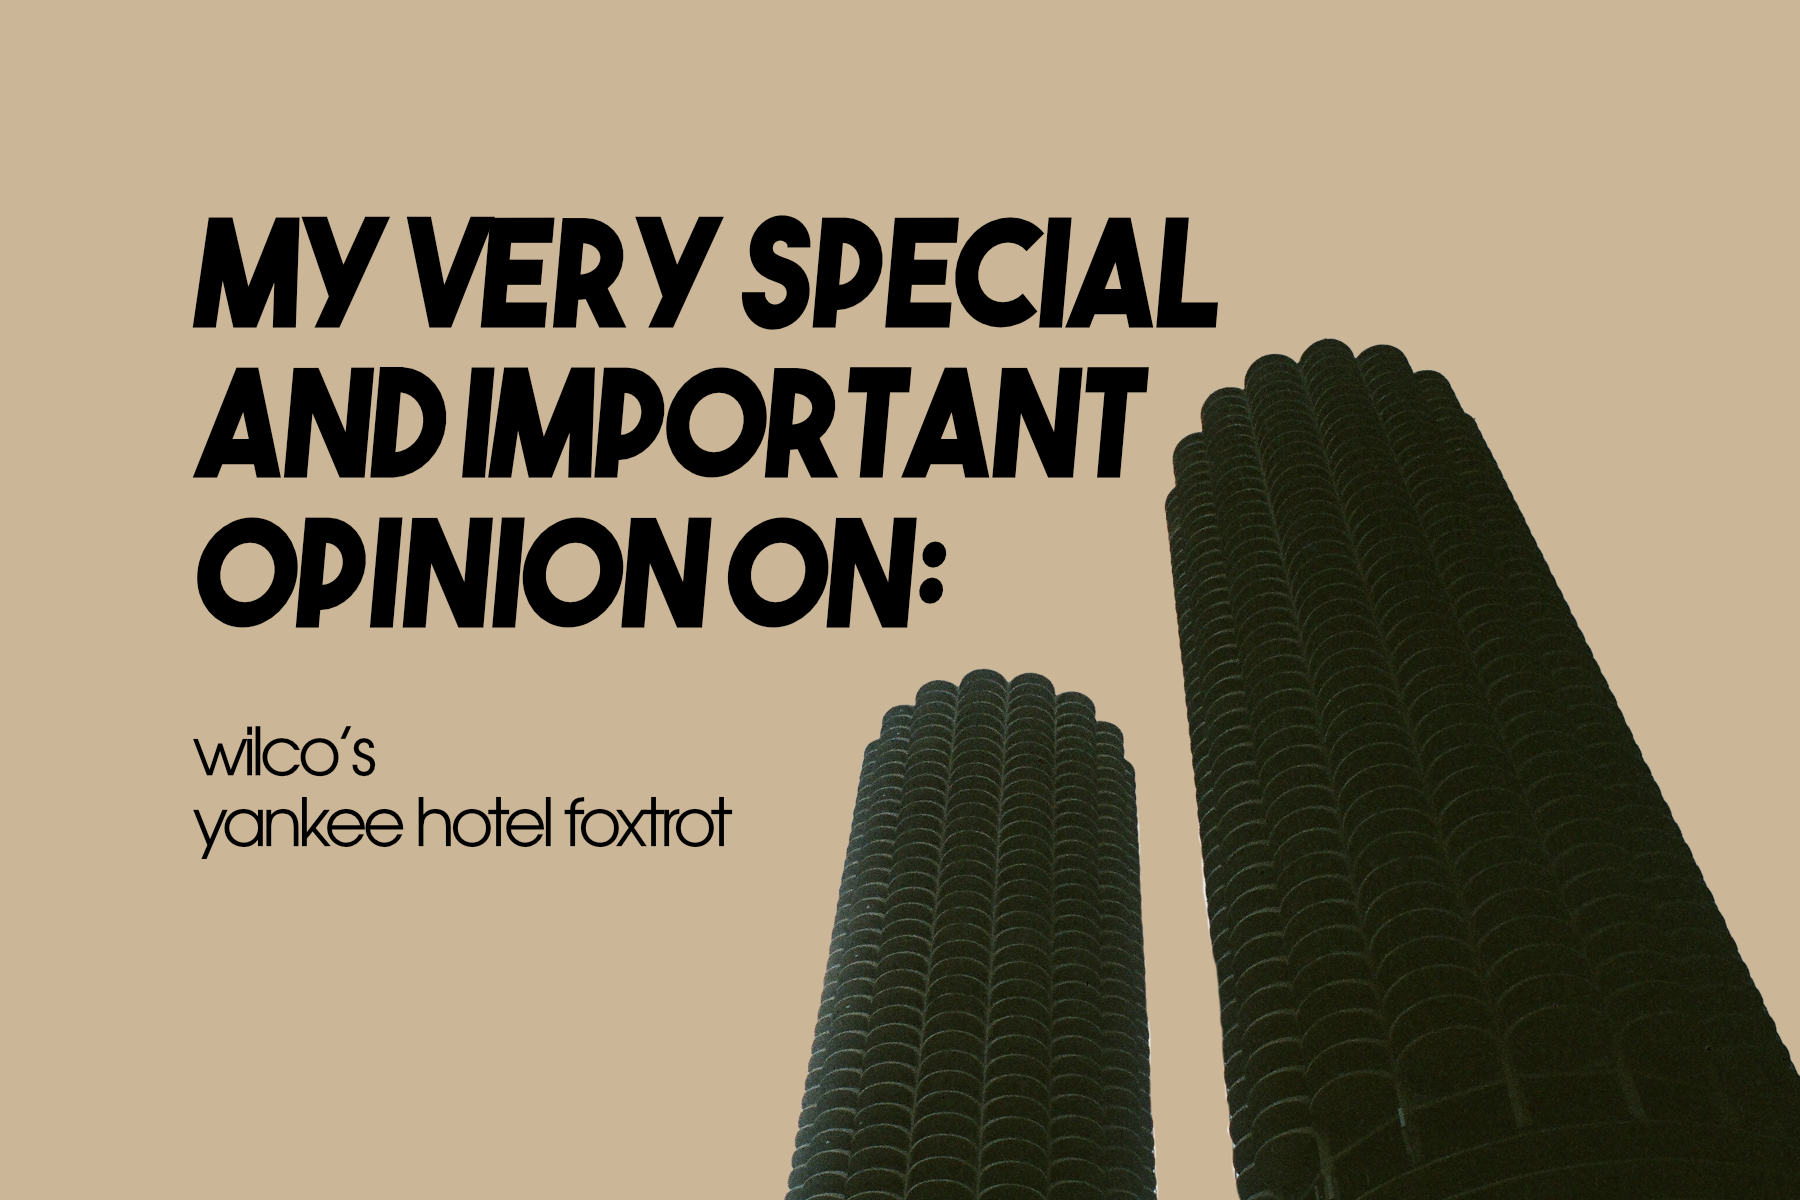 on yankee hotel foxtrot by wilco